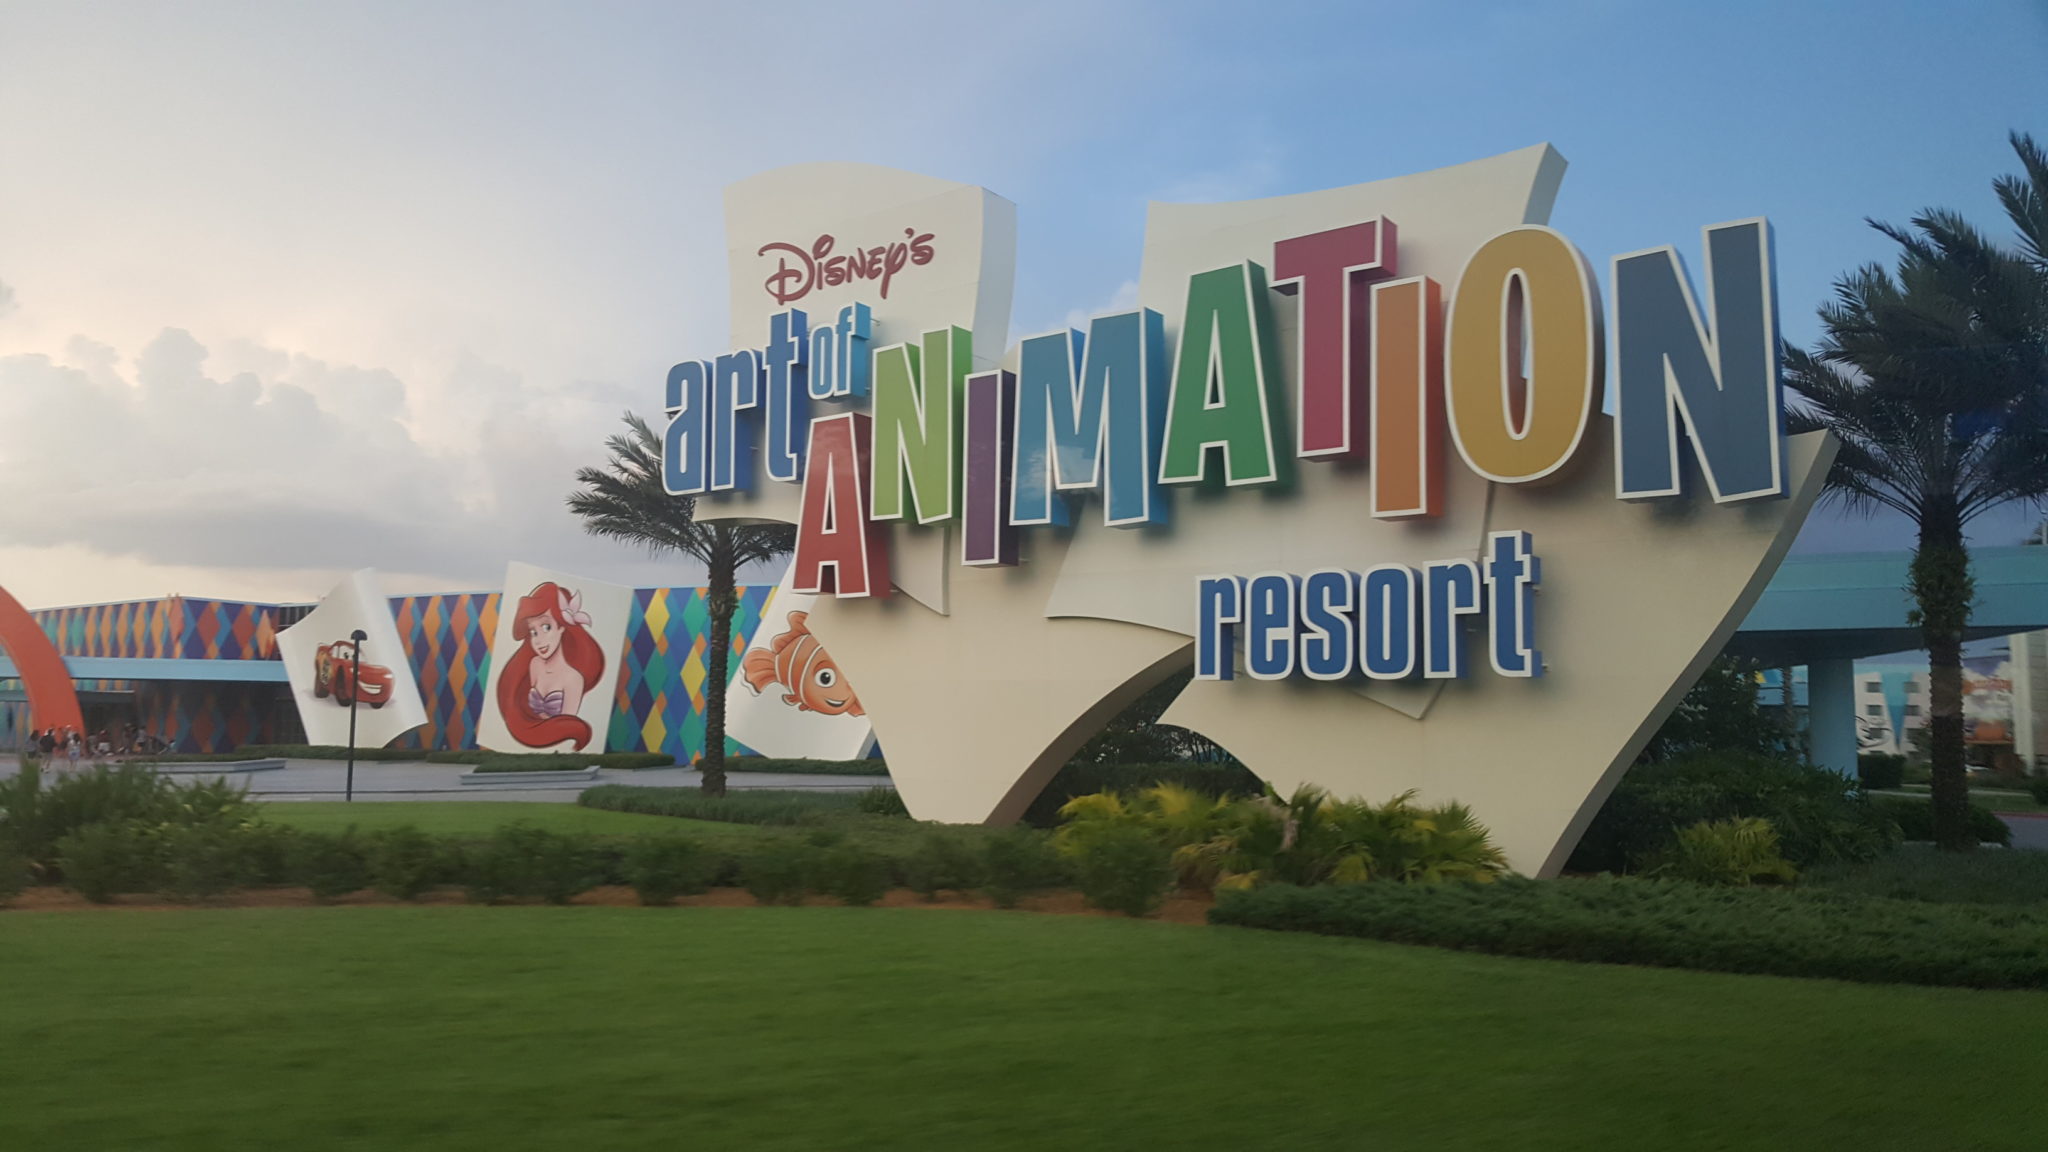 Florida Resident Discounts Announced for This Summer at Disney World